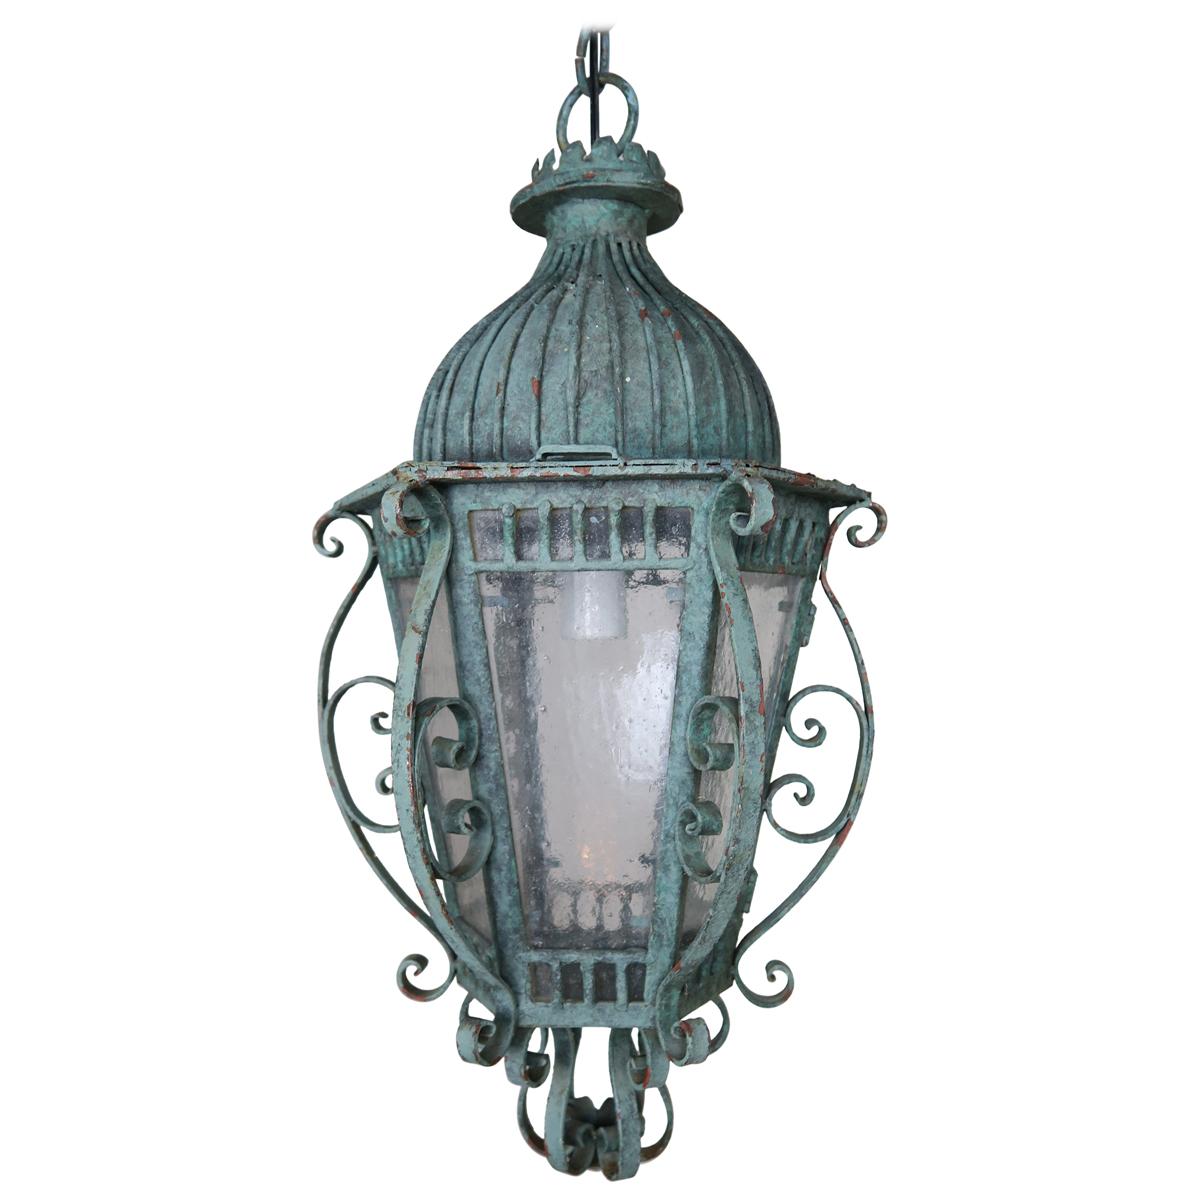 Painted French Wrought Iron Lantern with Domed Shaped Top, circa 1930s